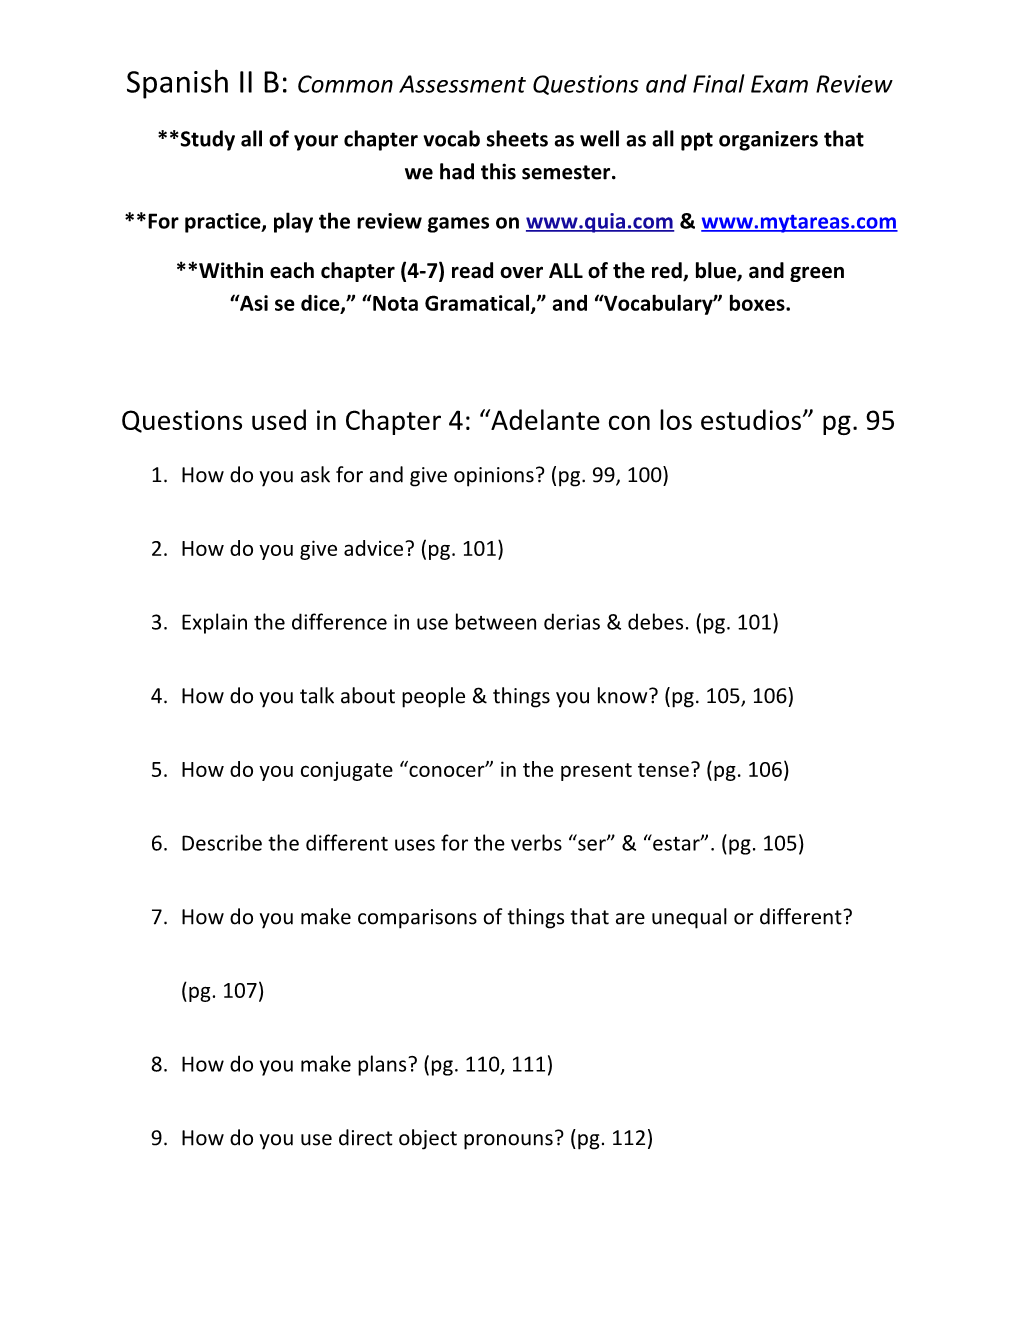 Spanish II B: Common Assessment Questions and Final Exam Review